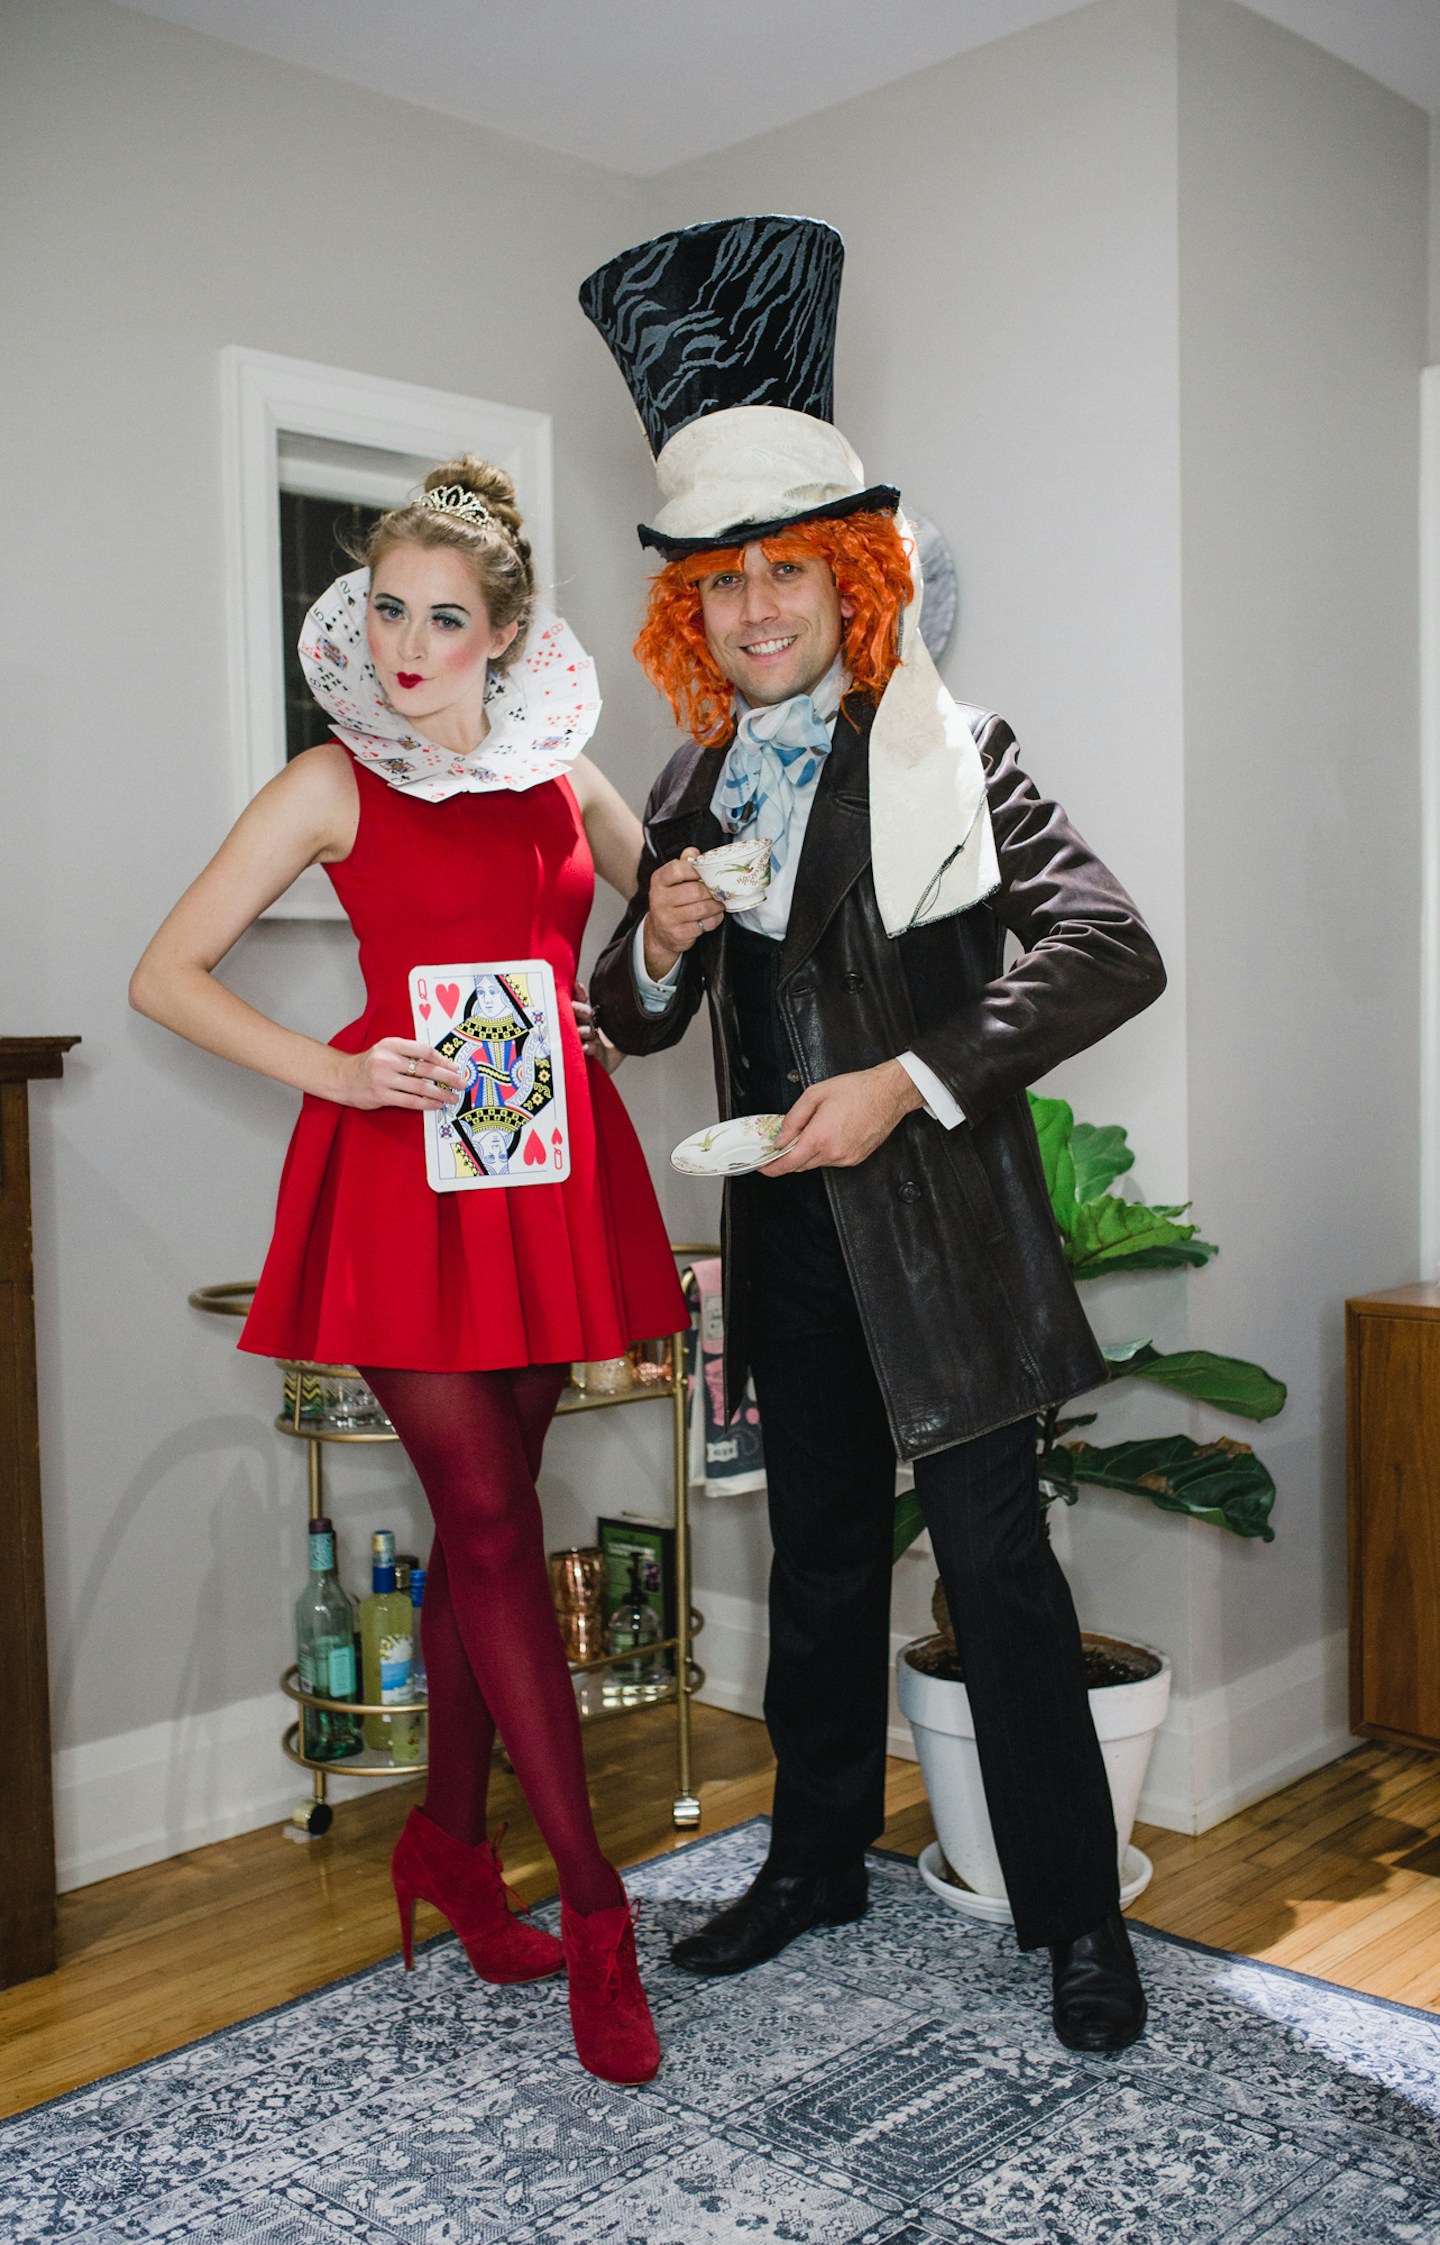 Alice in Wonderland couples Halloween costume: this post shares a DIY guide on how to create an awesome Mad Hatter and Queen of Hearts Halloween costume. Perfect for a Wonderland themed party or Halloween.